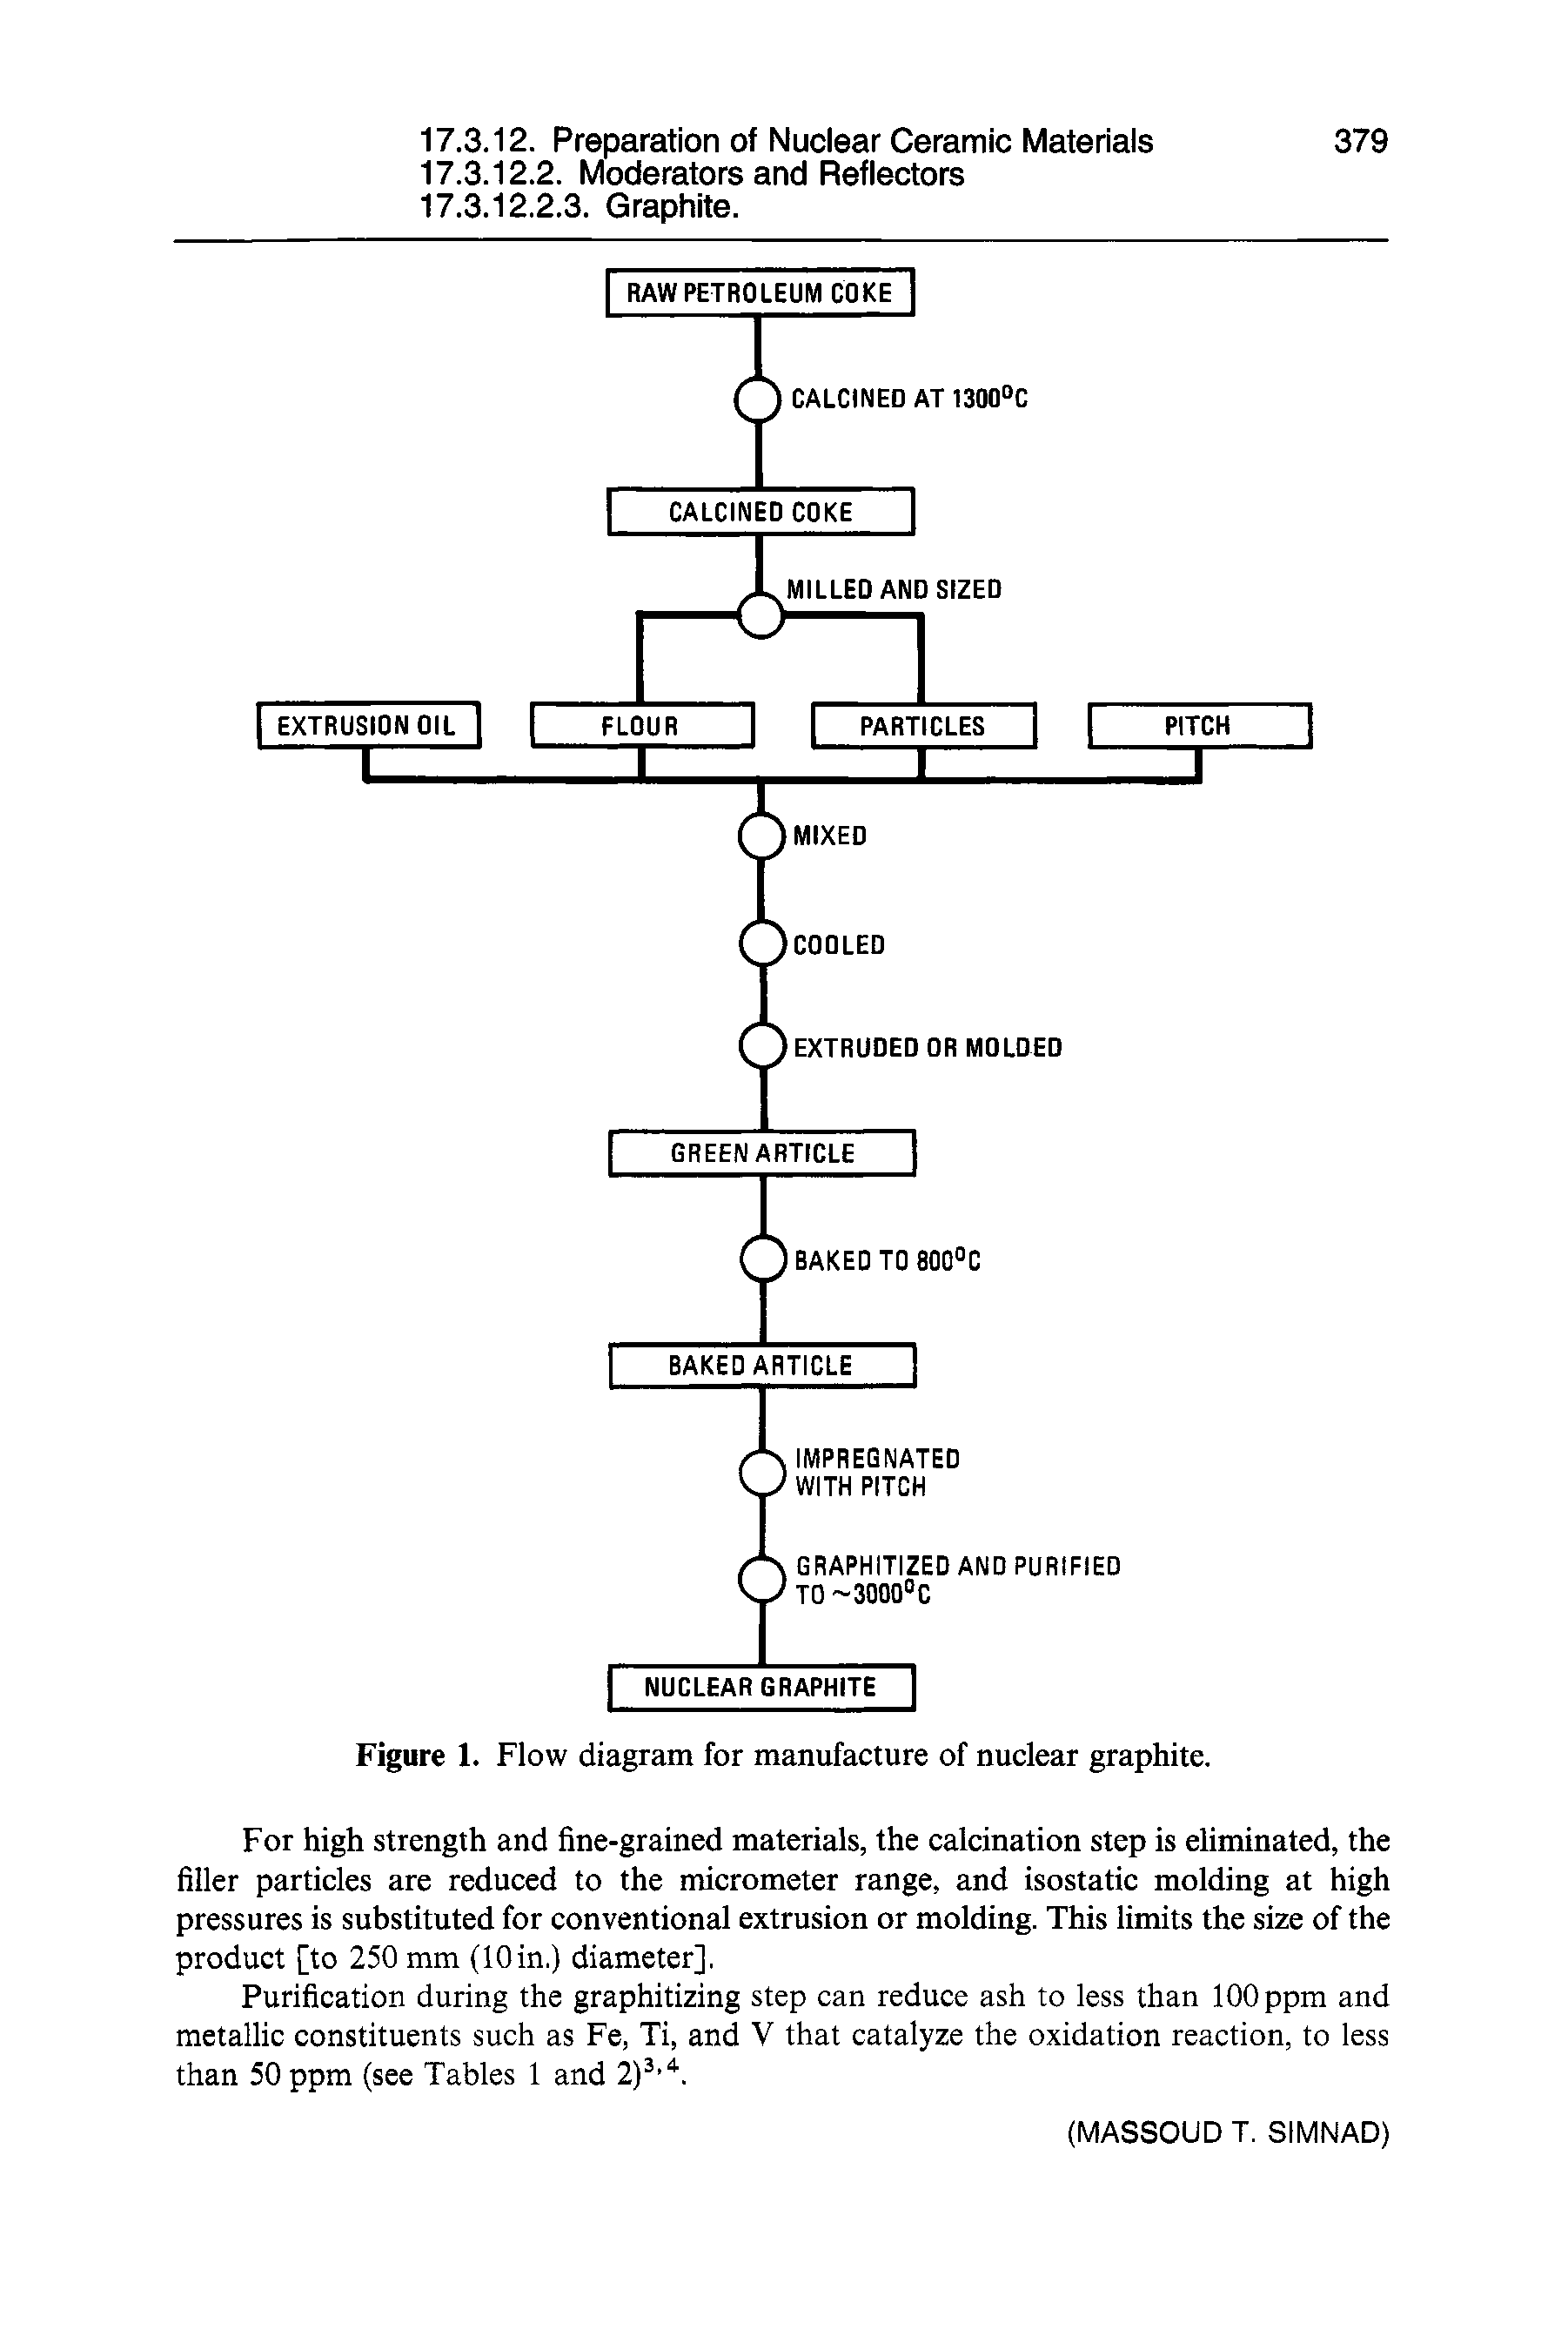 Figure 1. Flow diagram for manufacture of nuclear graphite.